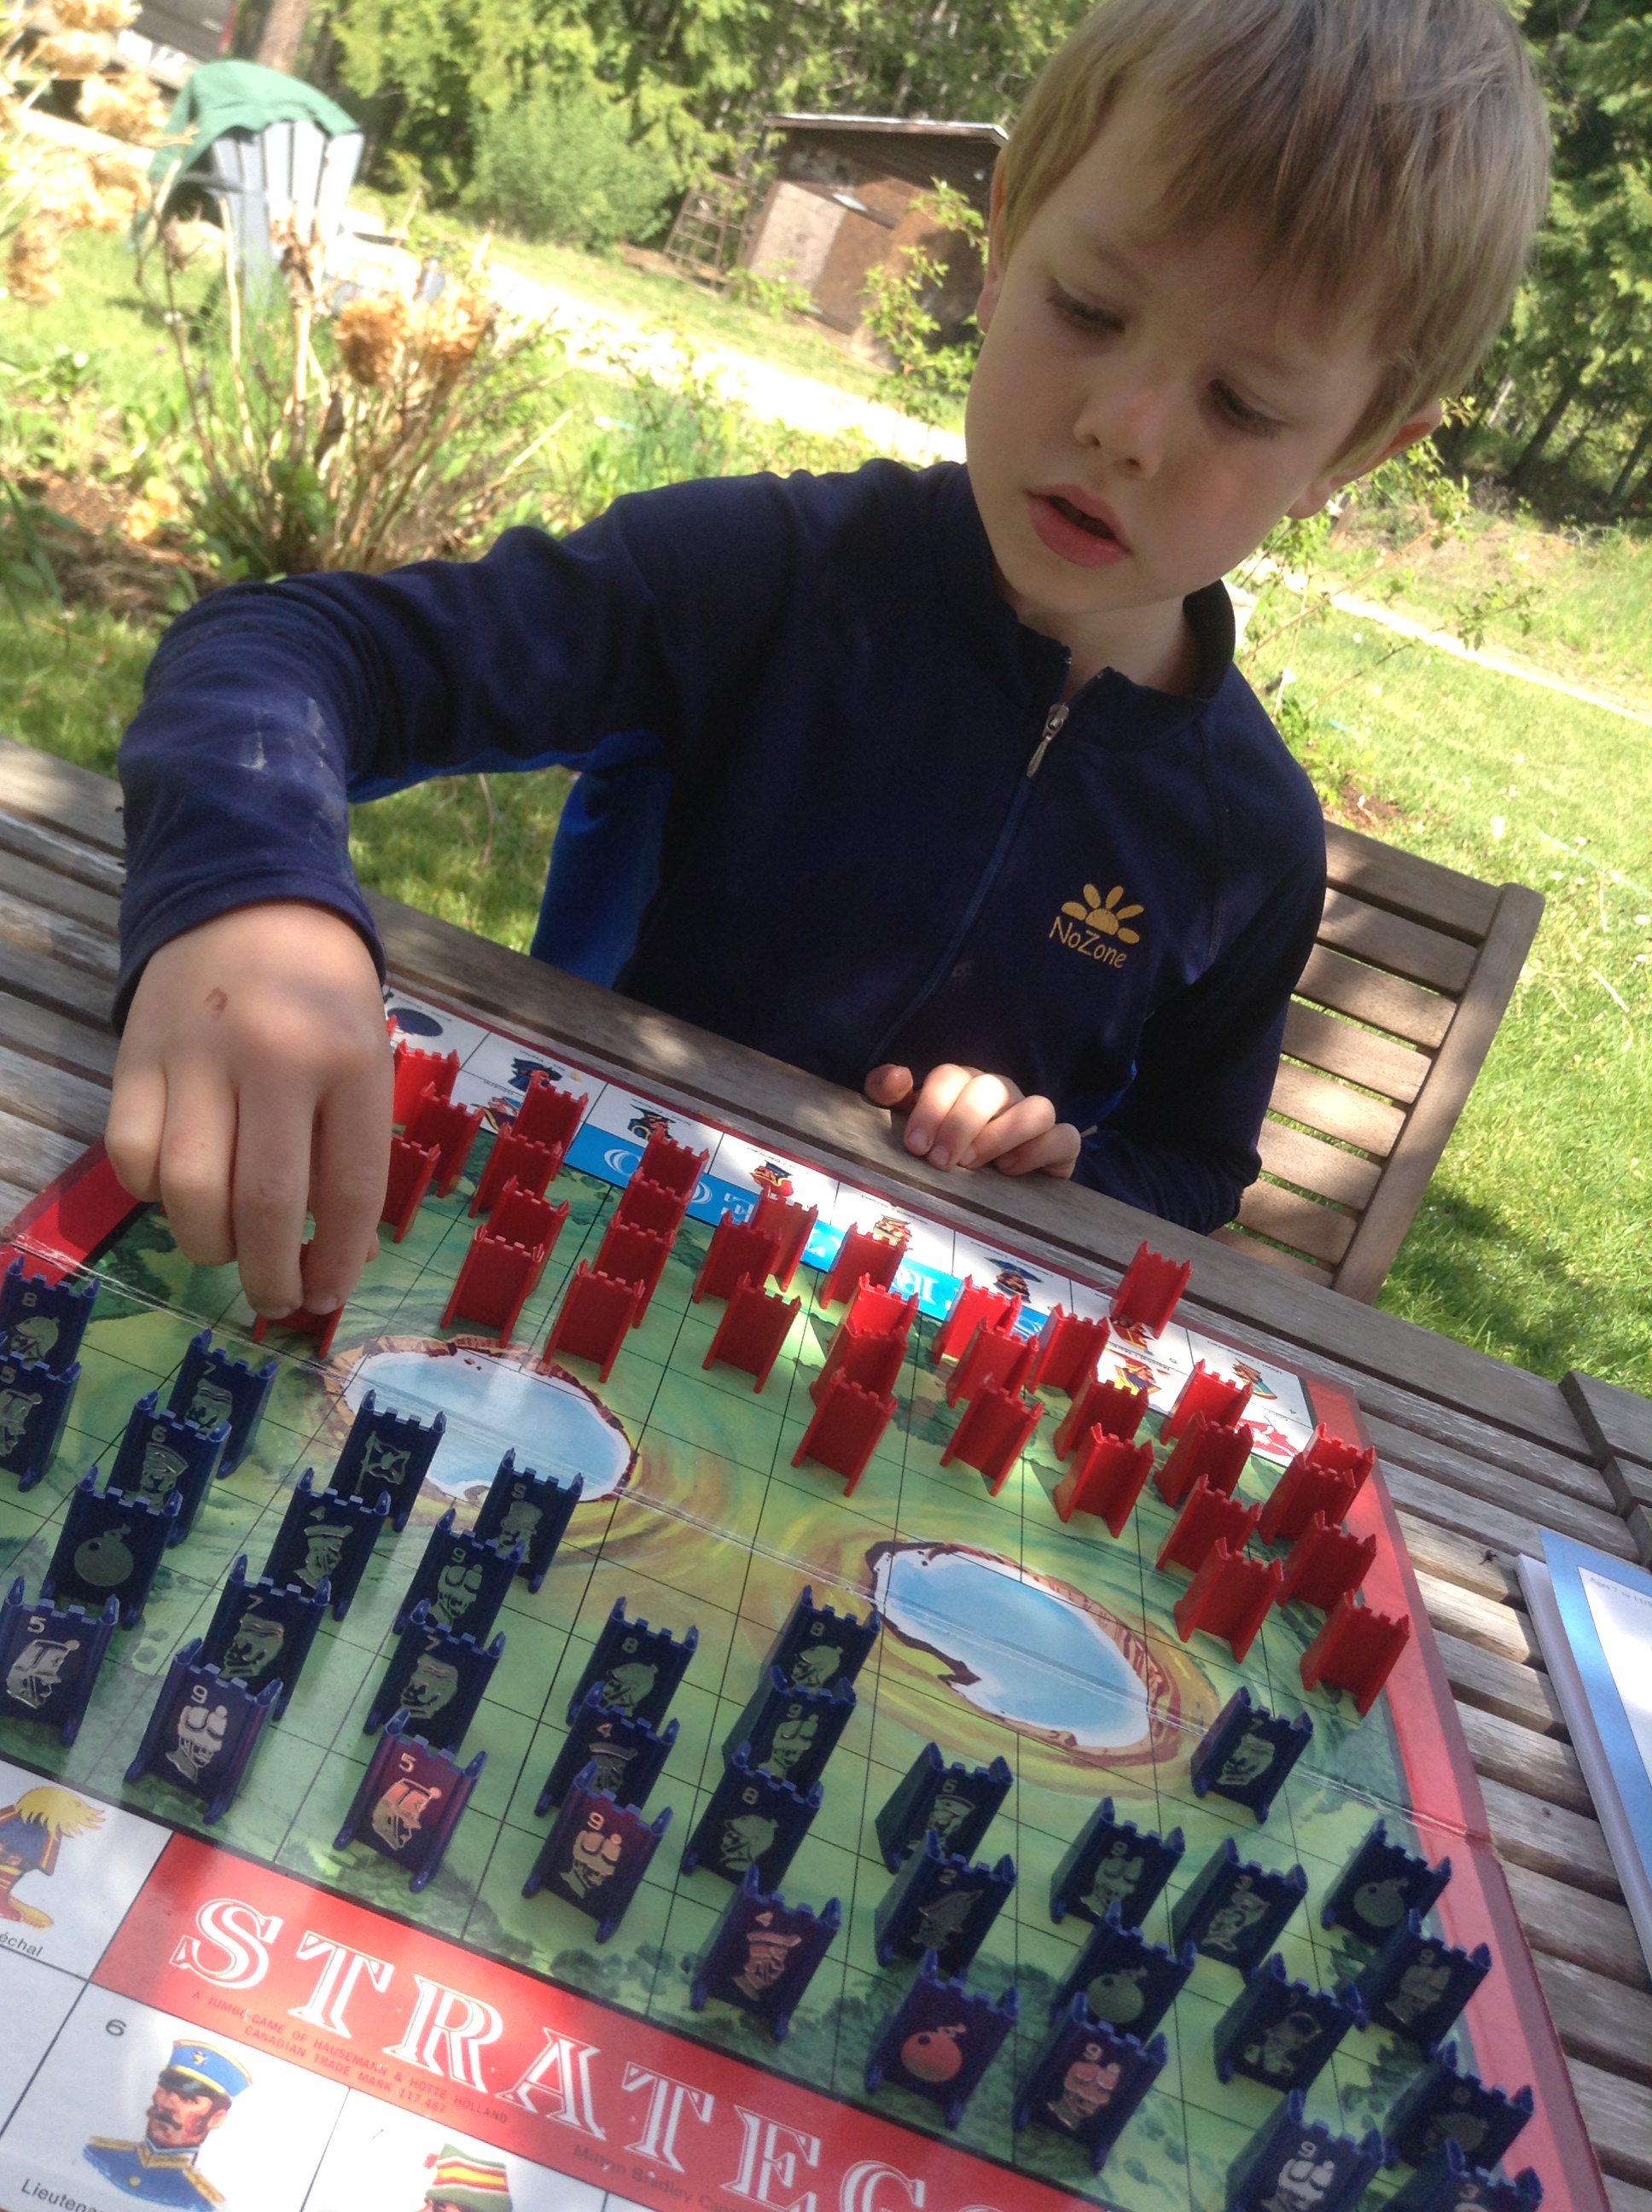 Are games like Stratego considered formal studies or unschooling?